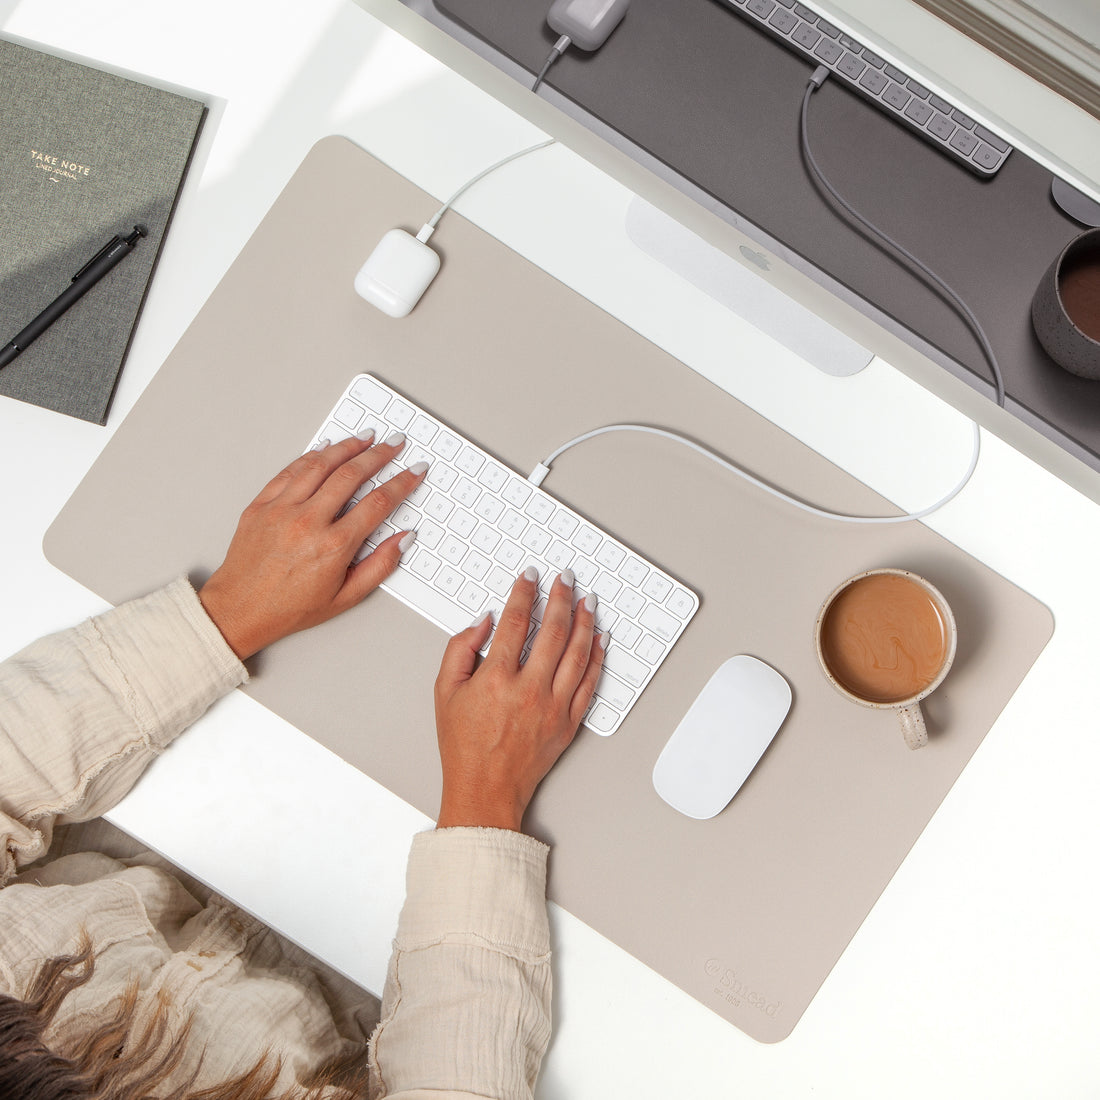 Choosing the Perfect Desk Pad for Your Workspace